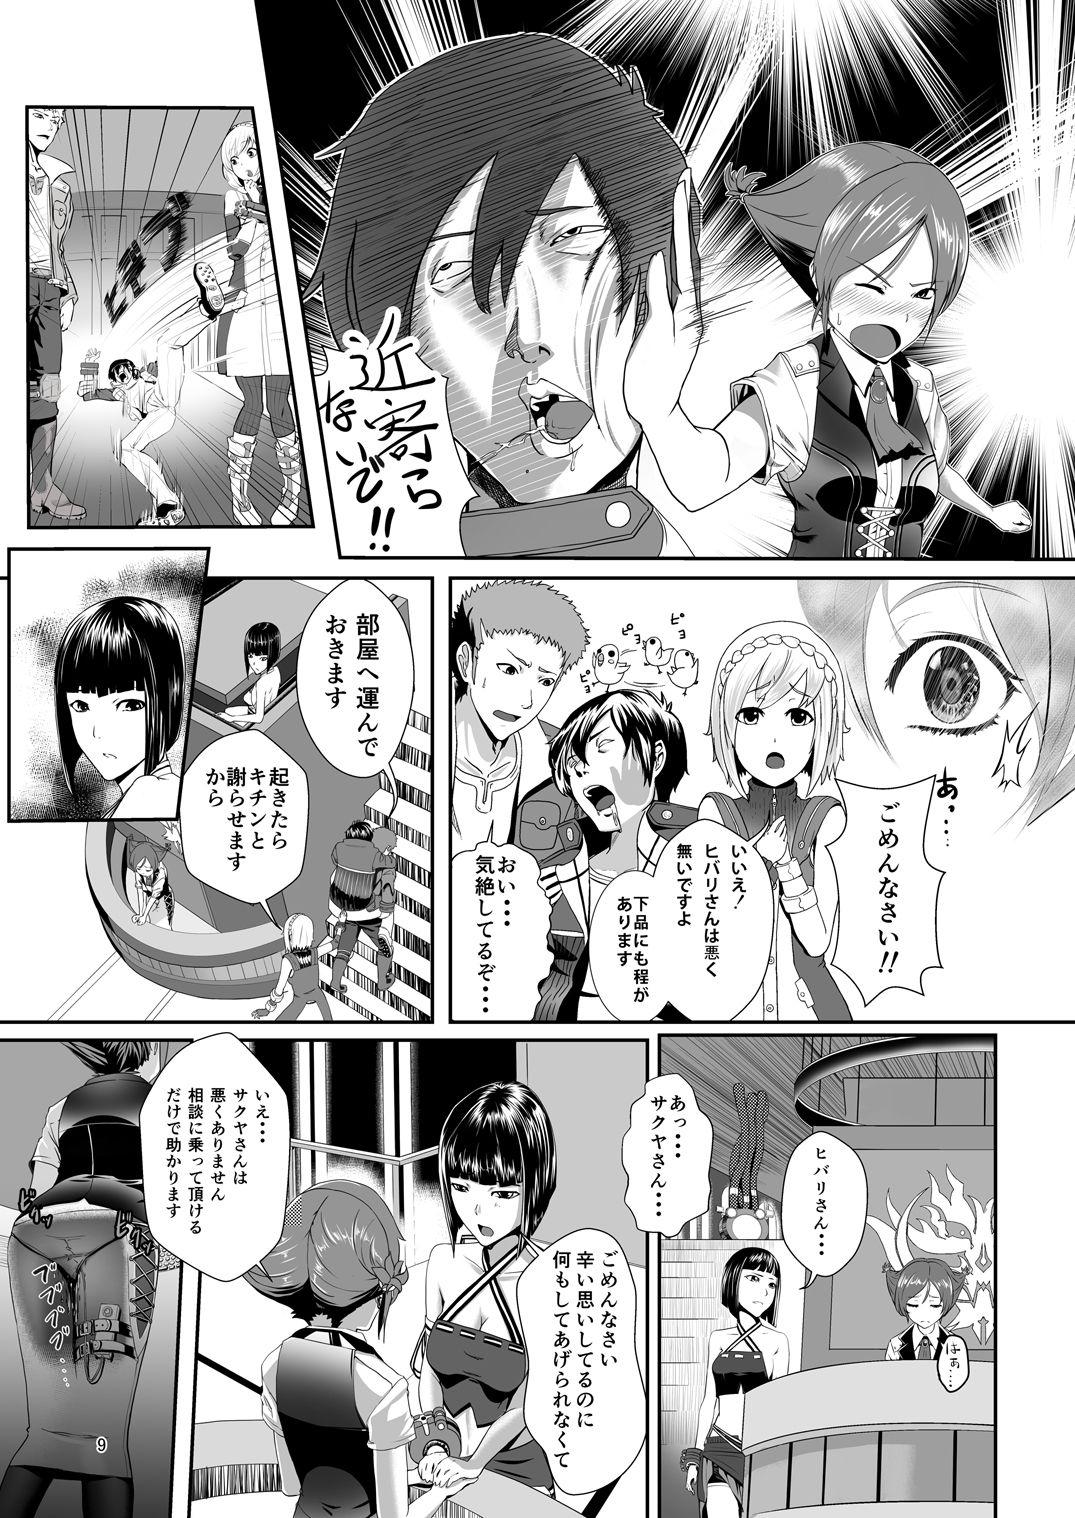 Swing COMPULSION EATER Vol. 2 - God eater Cums - Page 9